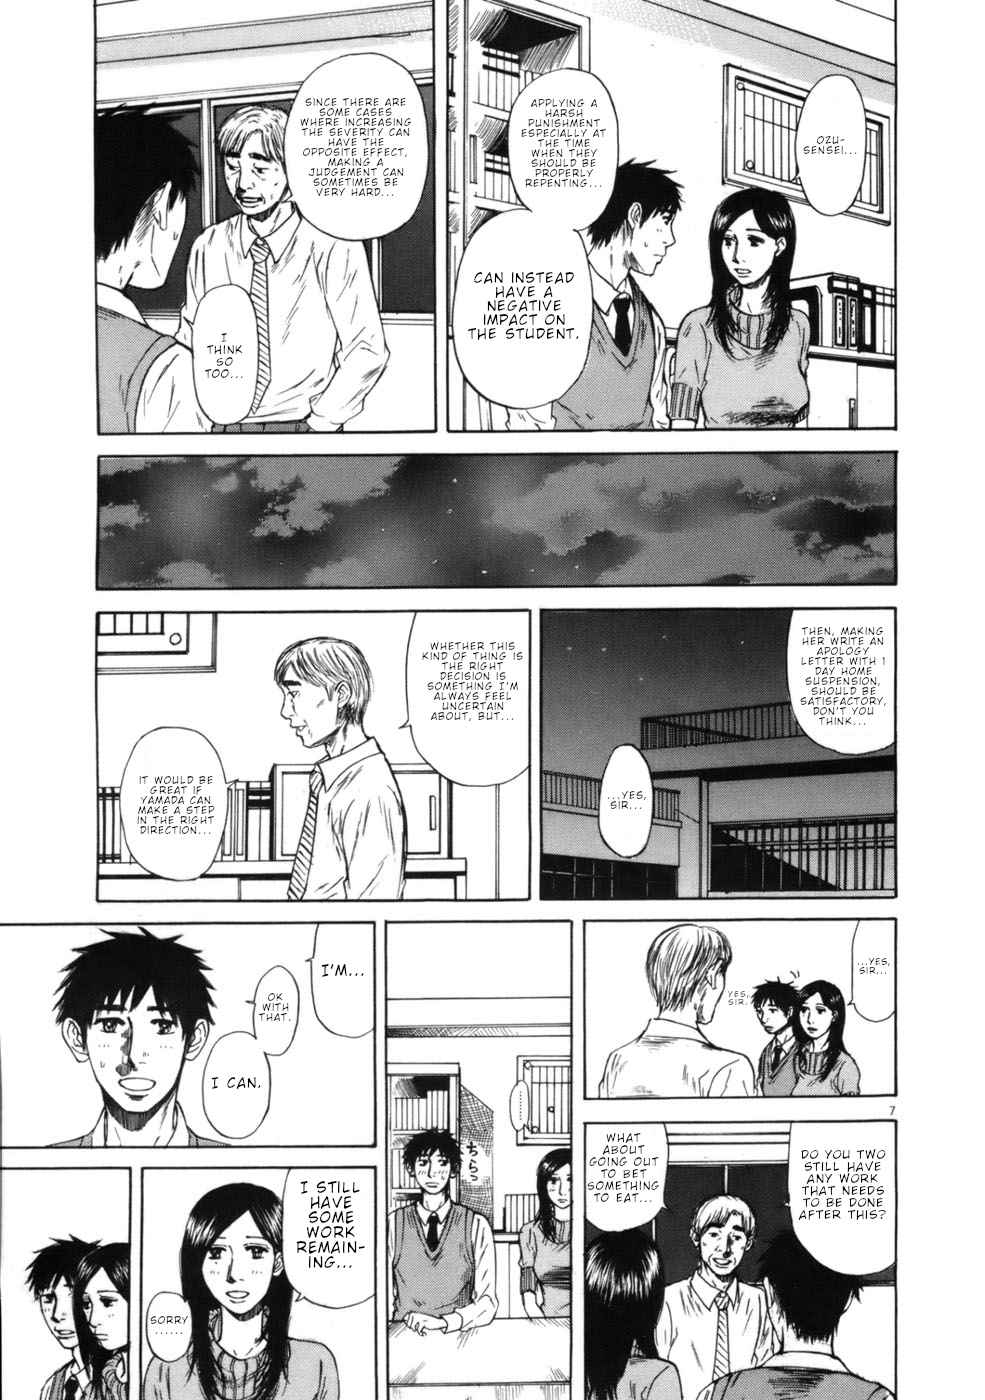 Hakuba no Oujisama Vol. 6 Ch. 64 Our Relationship is Work related